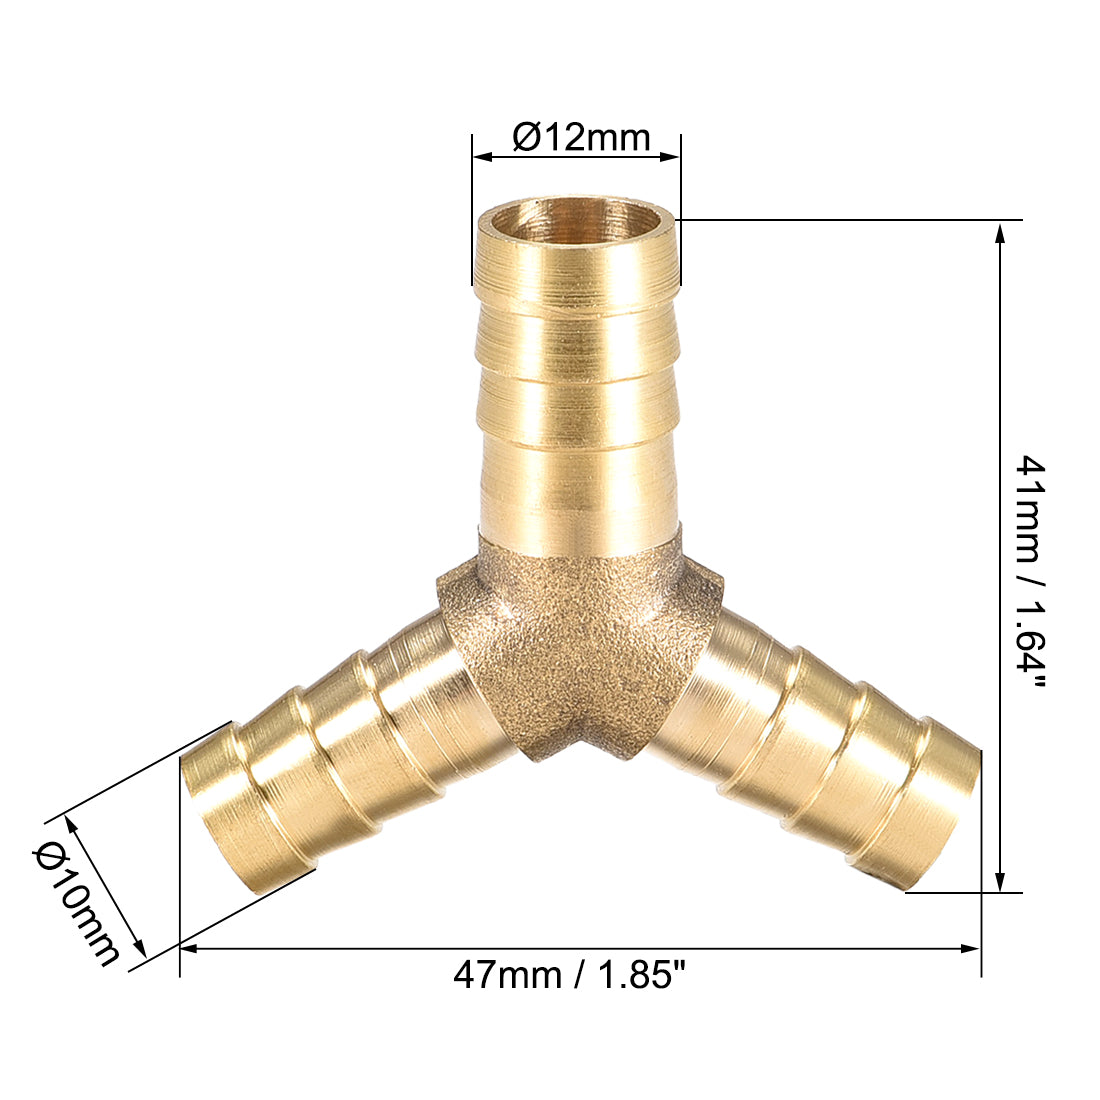 Uxcell Uxcell 10x6x6mm Hose ID Brass Reducer Barb Fitting Y-Shaped 3 Way Tee Connector Adapter